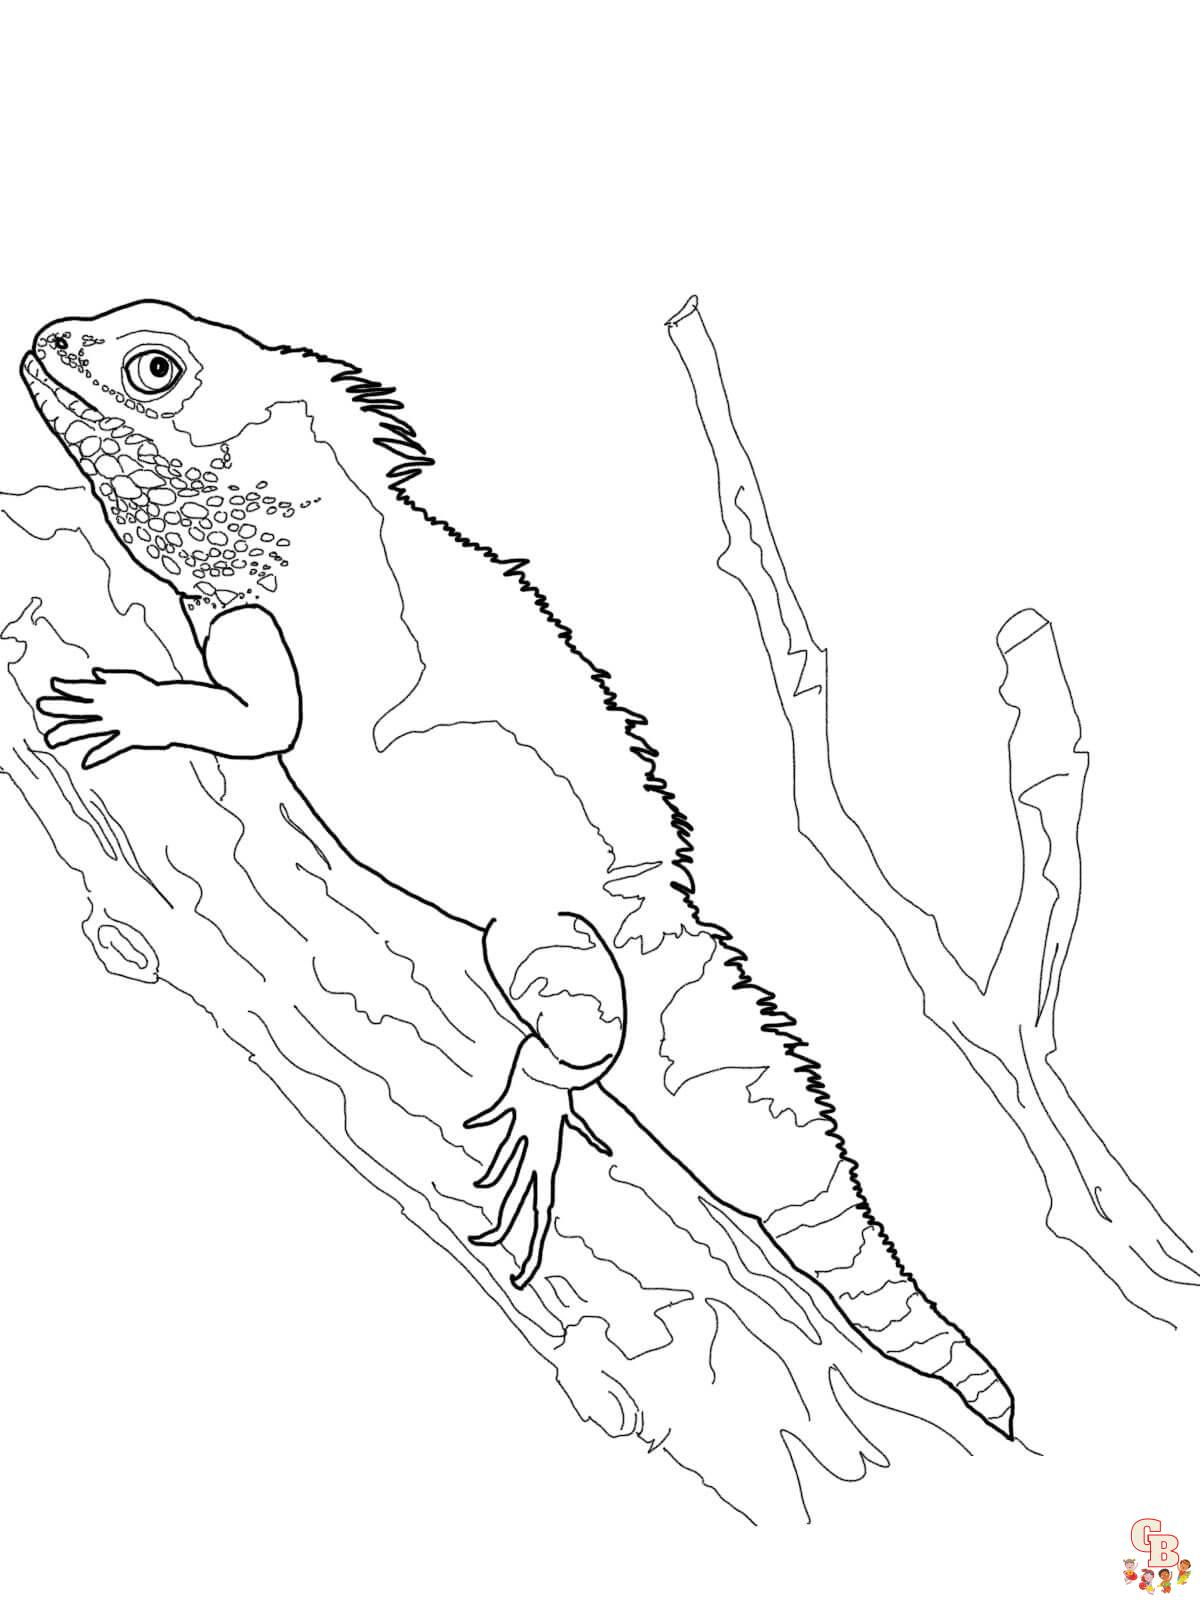 Bearded Dragon Coloring Pages 1 1